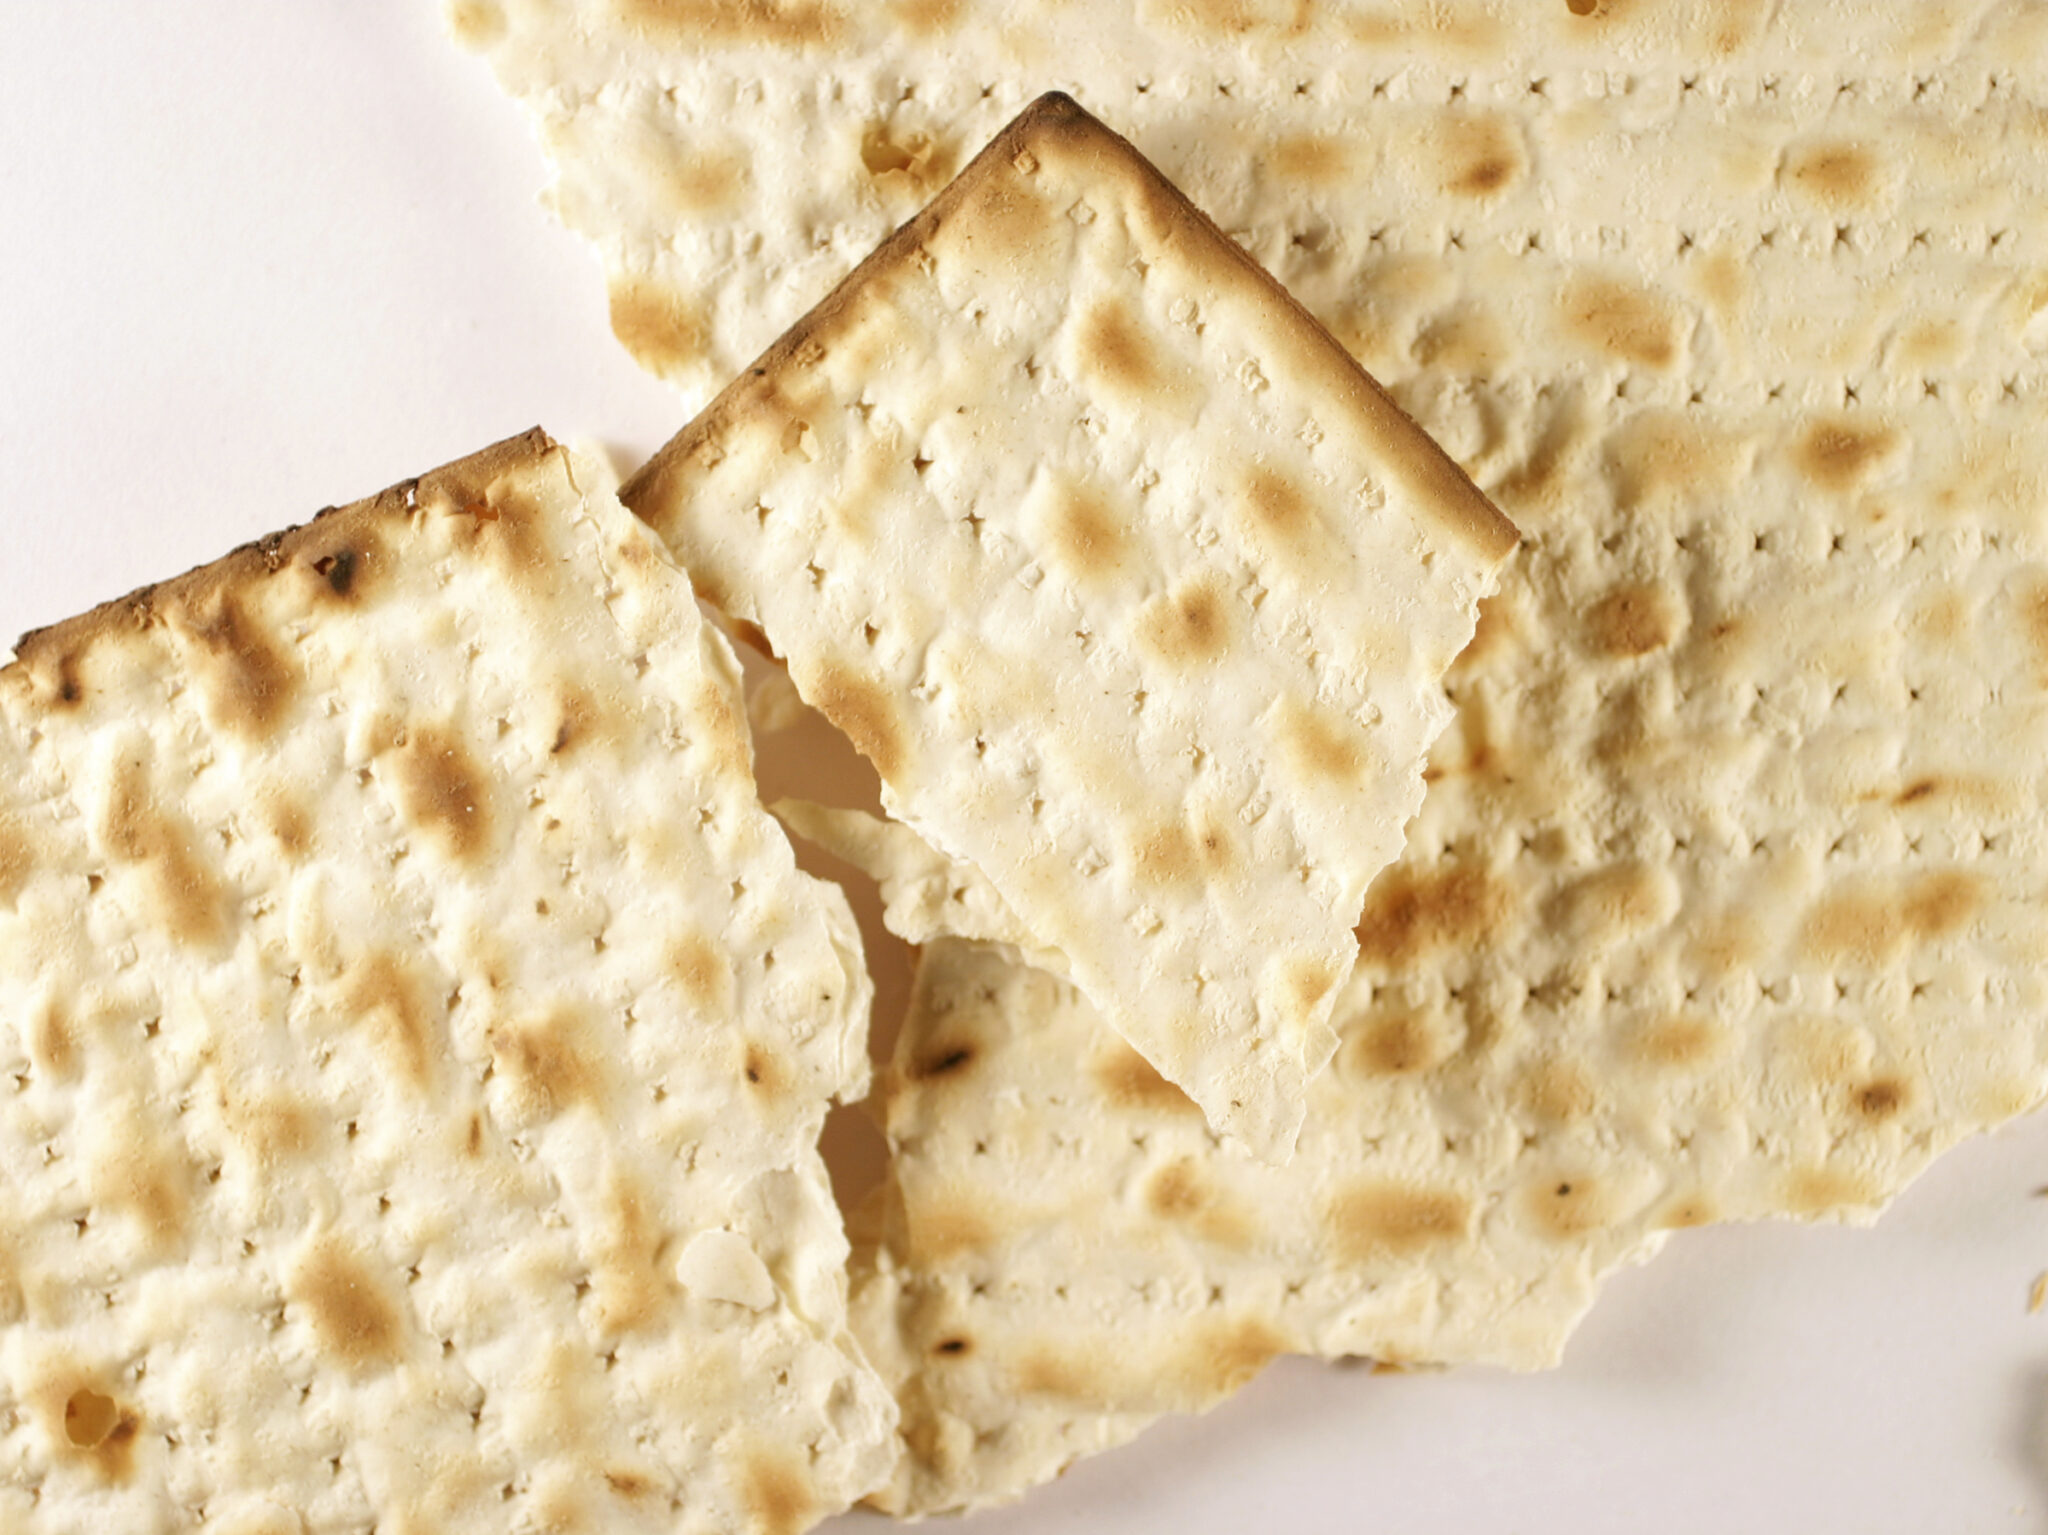 why do crackers and matzos have all those little holes in them